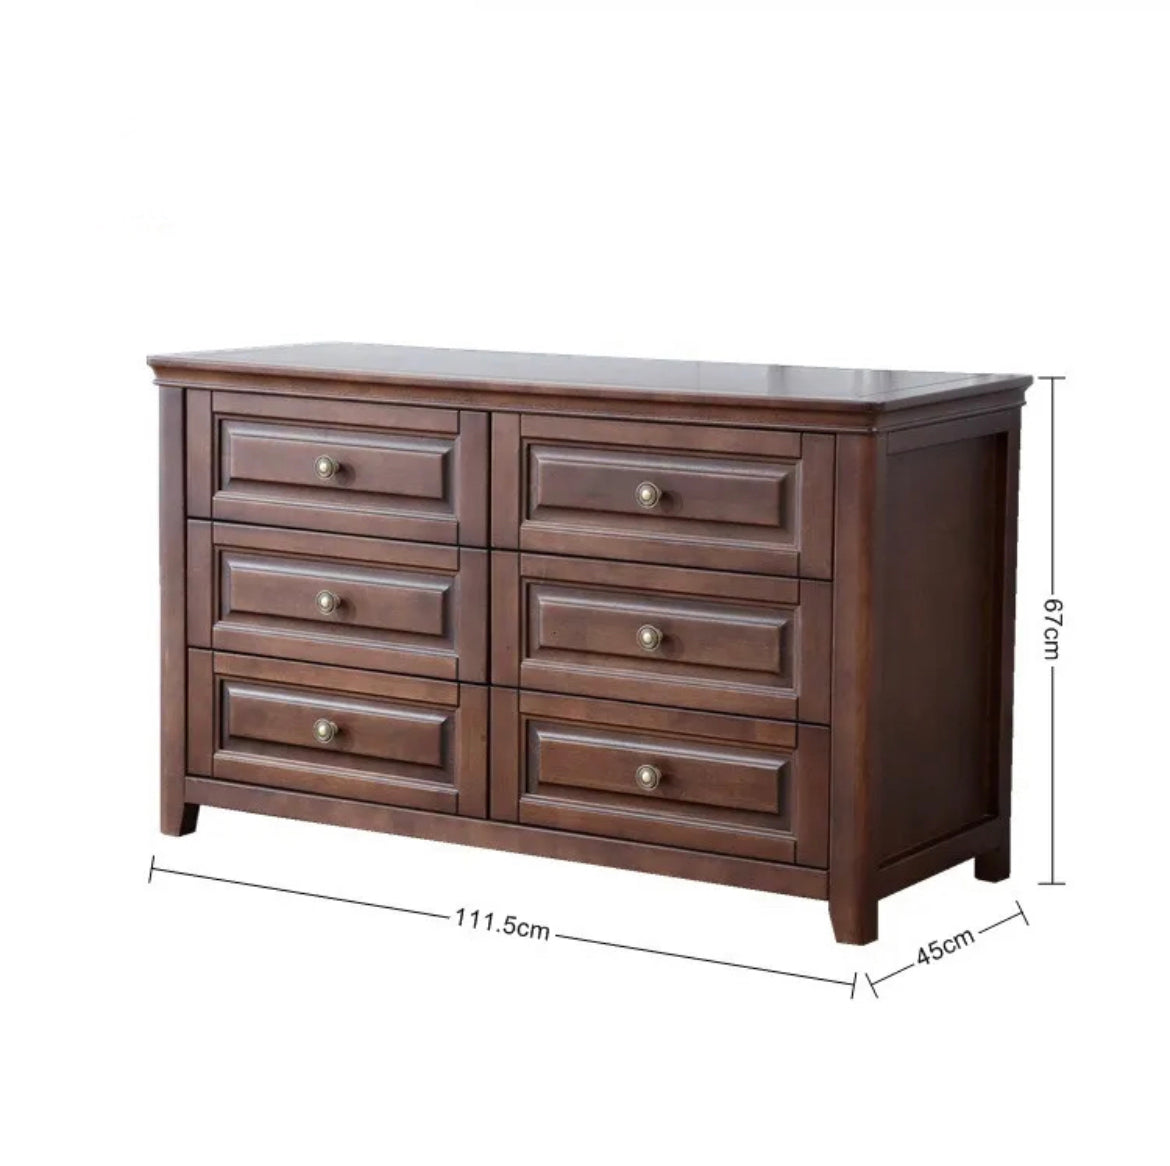 Cabinets America Rural Style Storable Walnut Color Living Room Furniture Solid Wood Cabinet